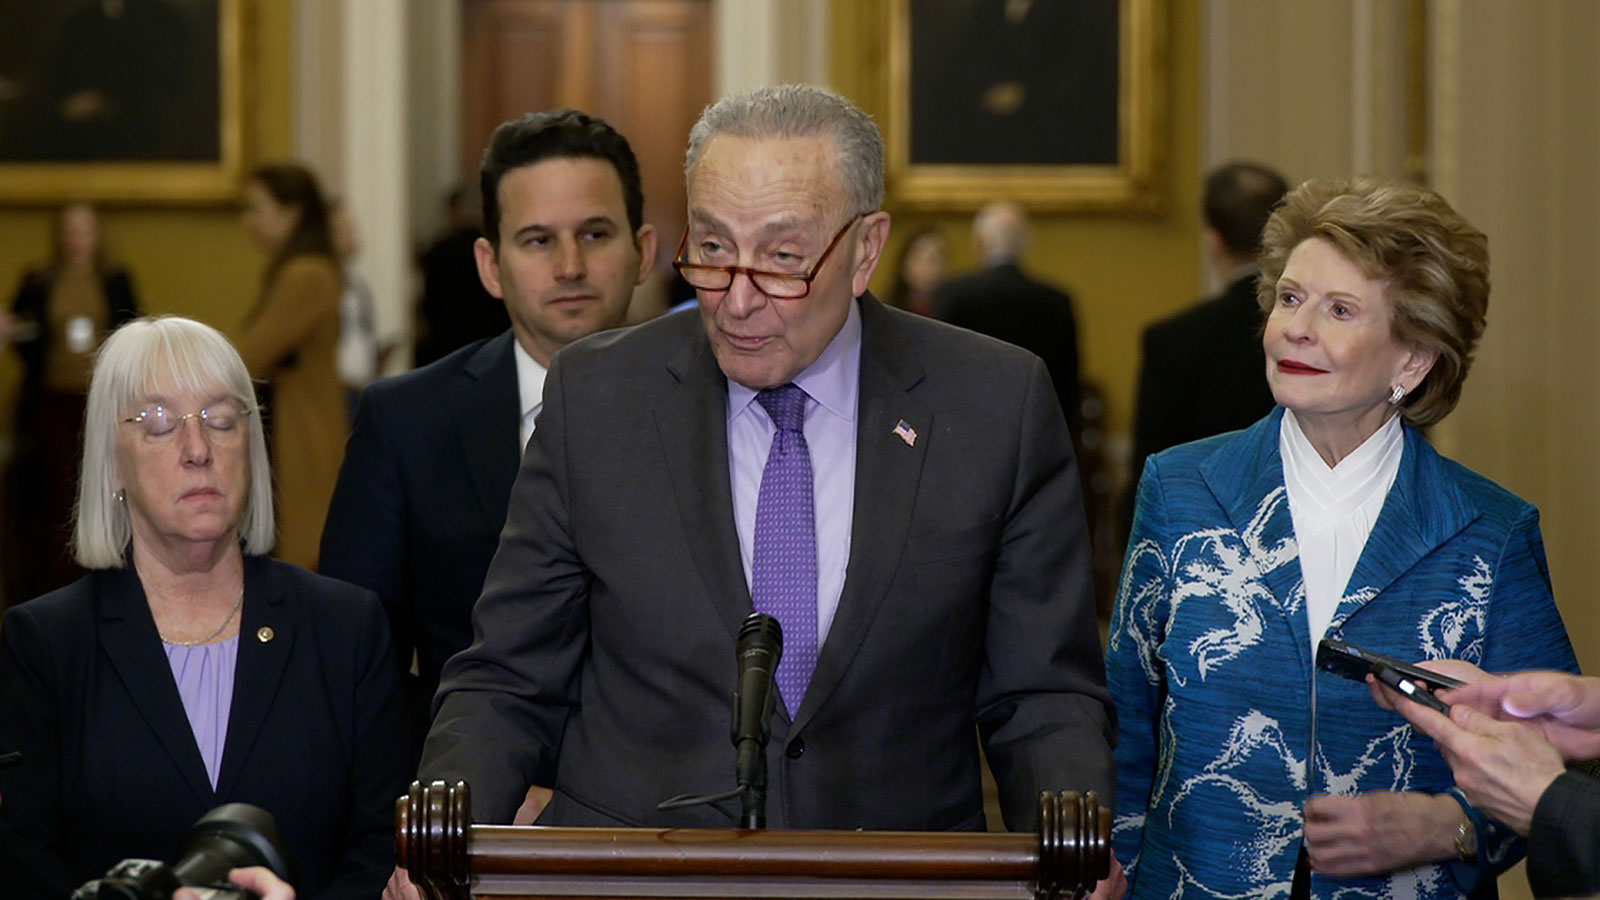 Senate Majority Leader Chuck Schumer pushed back on Republican criticism of his Israel speech, in which he called for the US ally to hold new elections. 